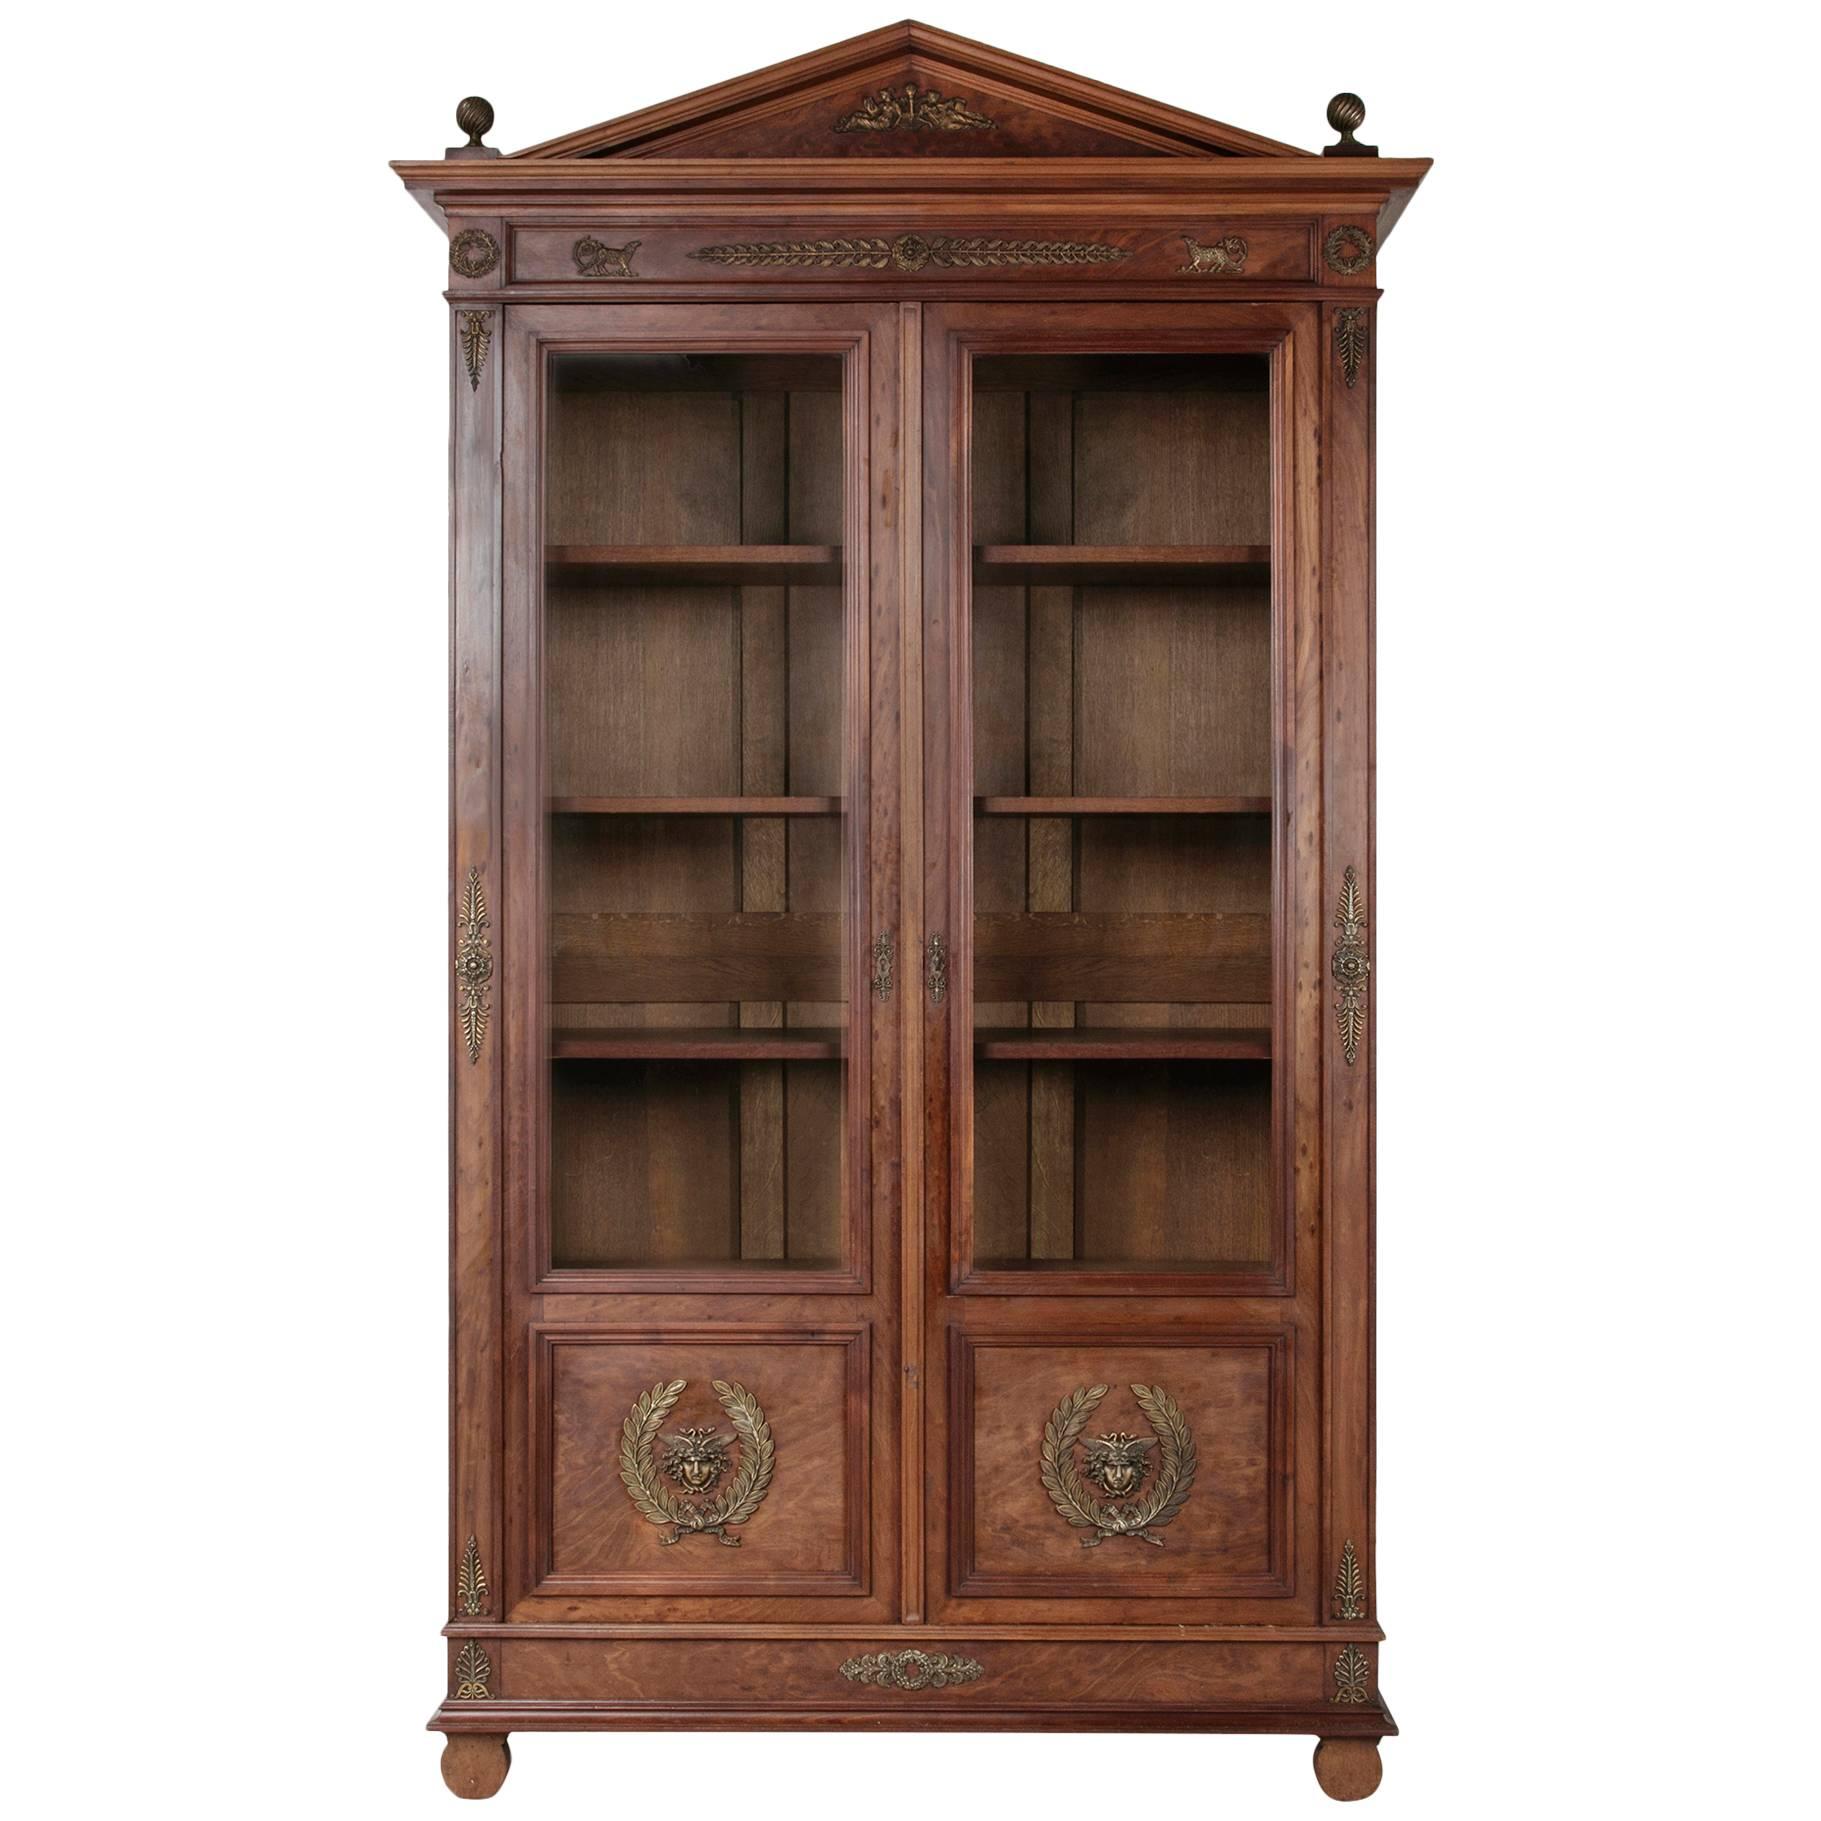 Tall Directoire and Empire Plum Pudding Mahogany Bibliotheque Bookcase Cabinet